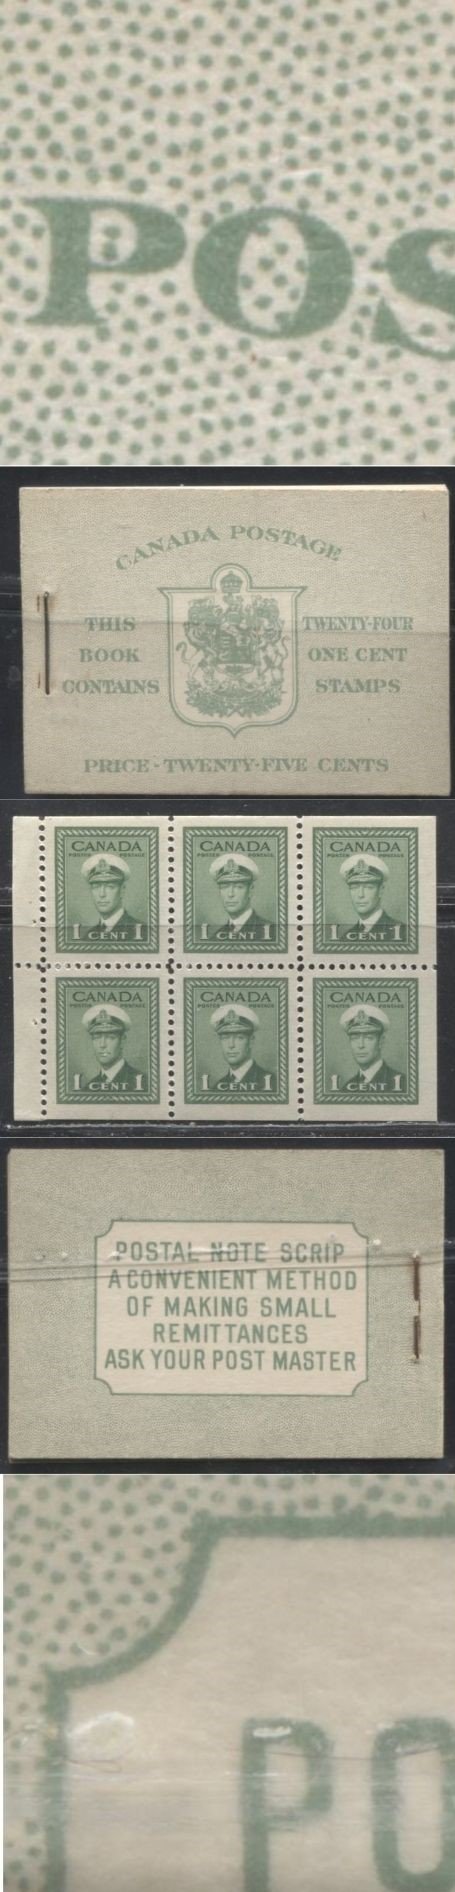 Lot 247 Canada #BK32f 1942-1949 War Issue, Complete 25¢ English Booklet, 4 Panes of 1c Green,  Smooth Ribbed Paper, Harris Front Cover Type IIb, Back Cover Type Cbiii, 7c & 6c Airmail Rates Page